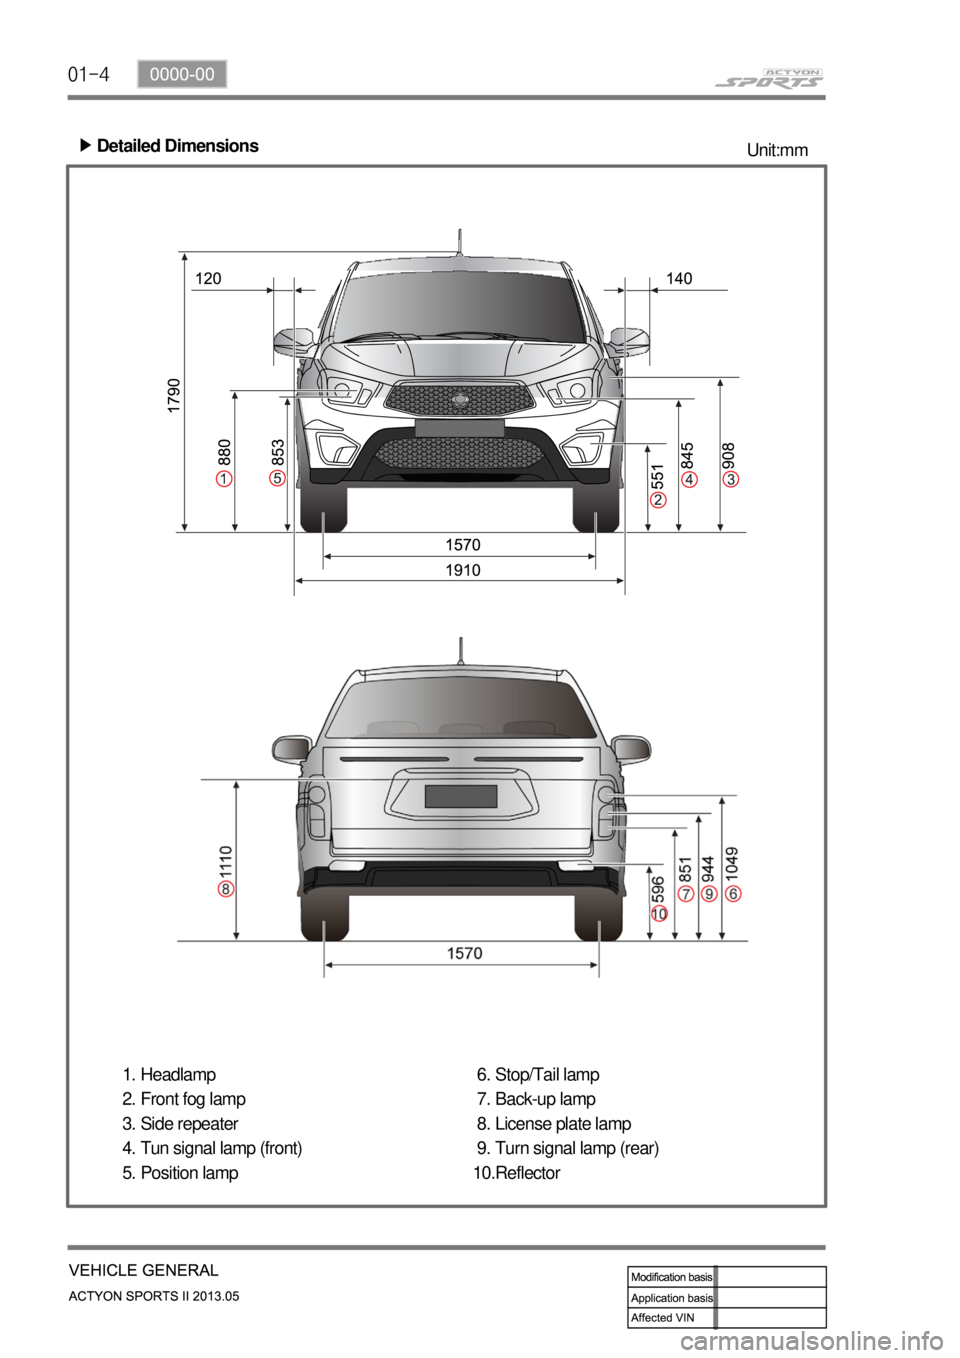 SSANGYONG NEW ACTYON SPORTS 2013  Service Manual 01-4
Detailed Dimensions ▶
Unit:mm
Headlamp
Front fog lamp
Side repeater
Tun signal lamp (front)
Position lamp 1.
2.
3.
4.
5.Stop/Tail lamp
Back-up lamp
License plate lamp
Turn signal lamp (rear)
Re